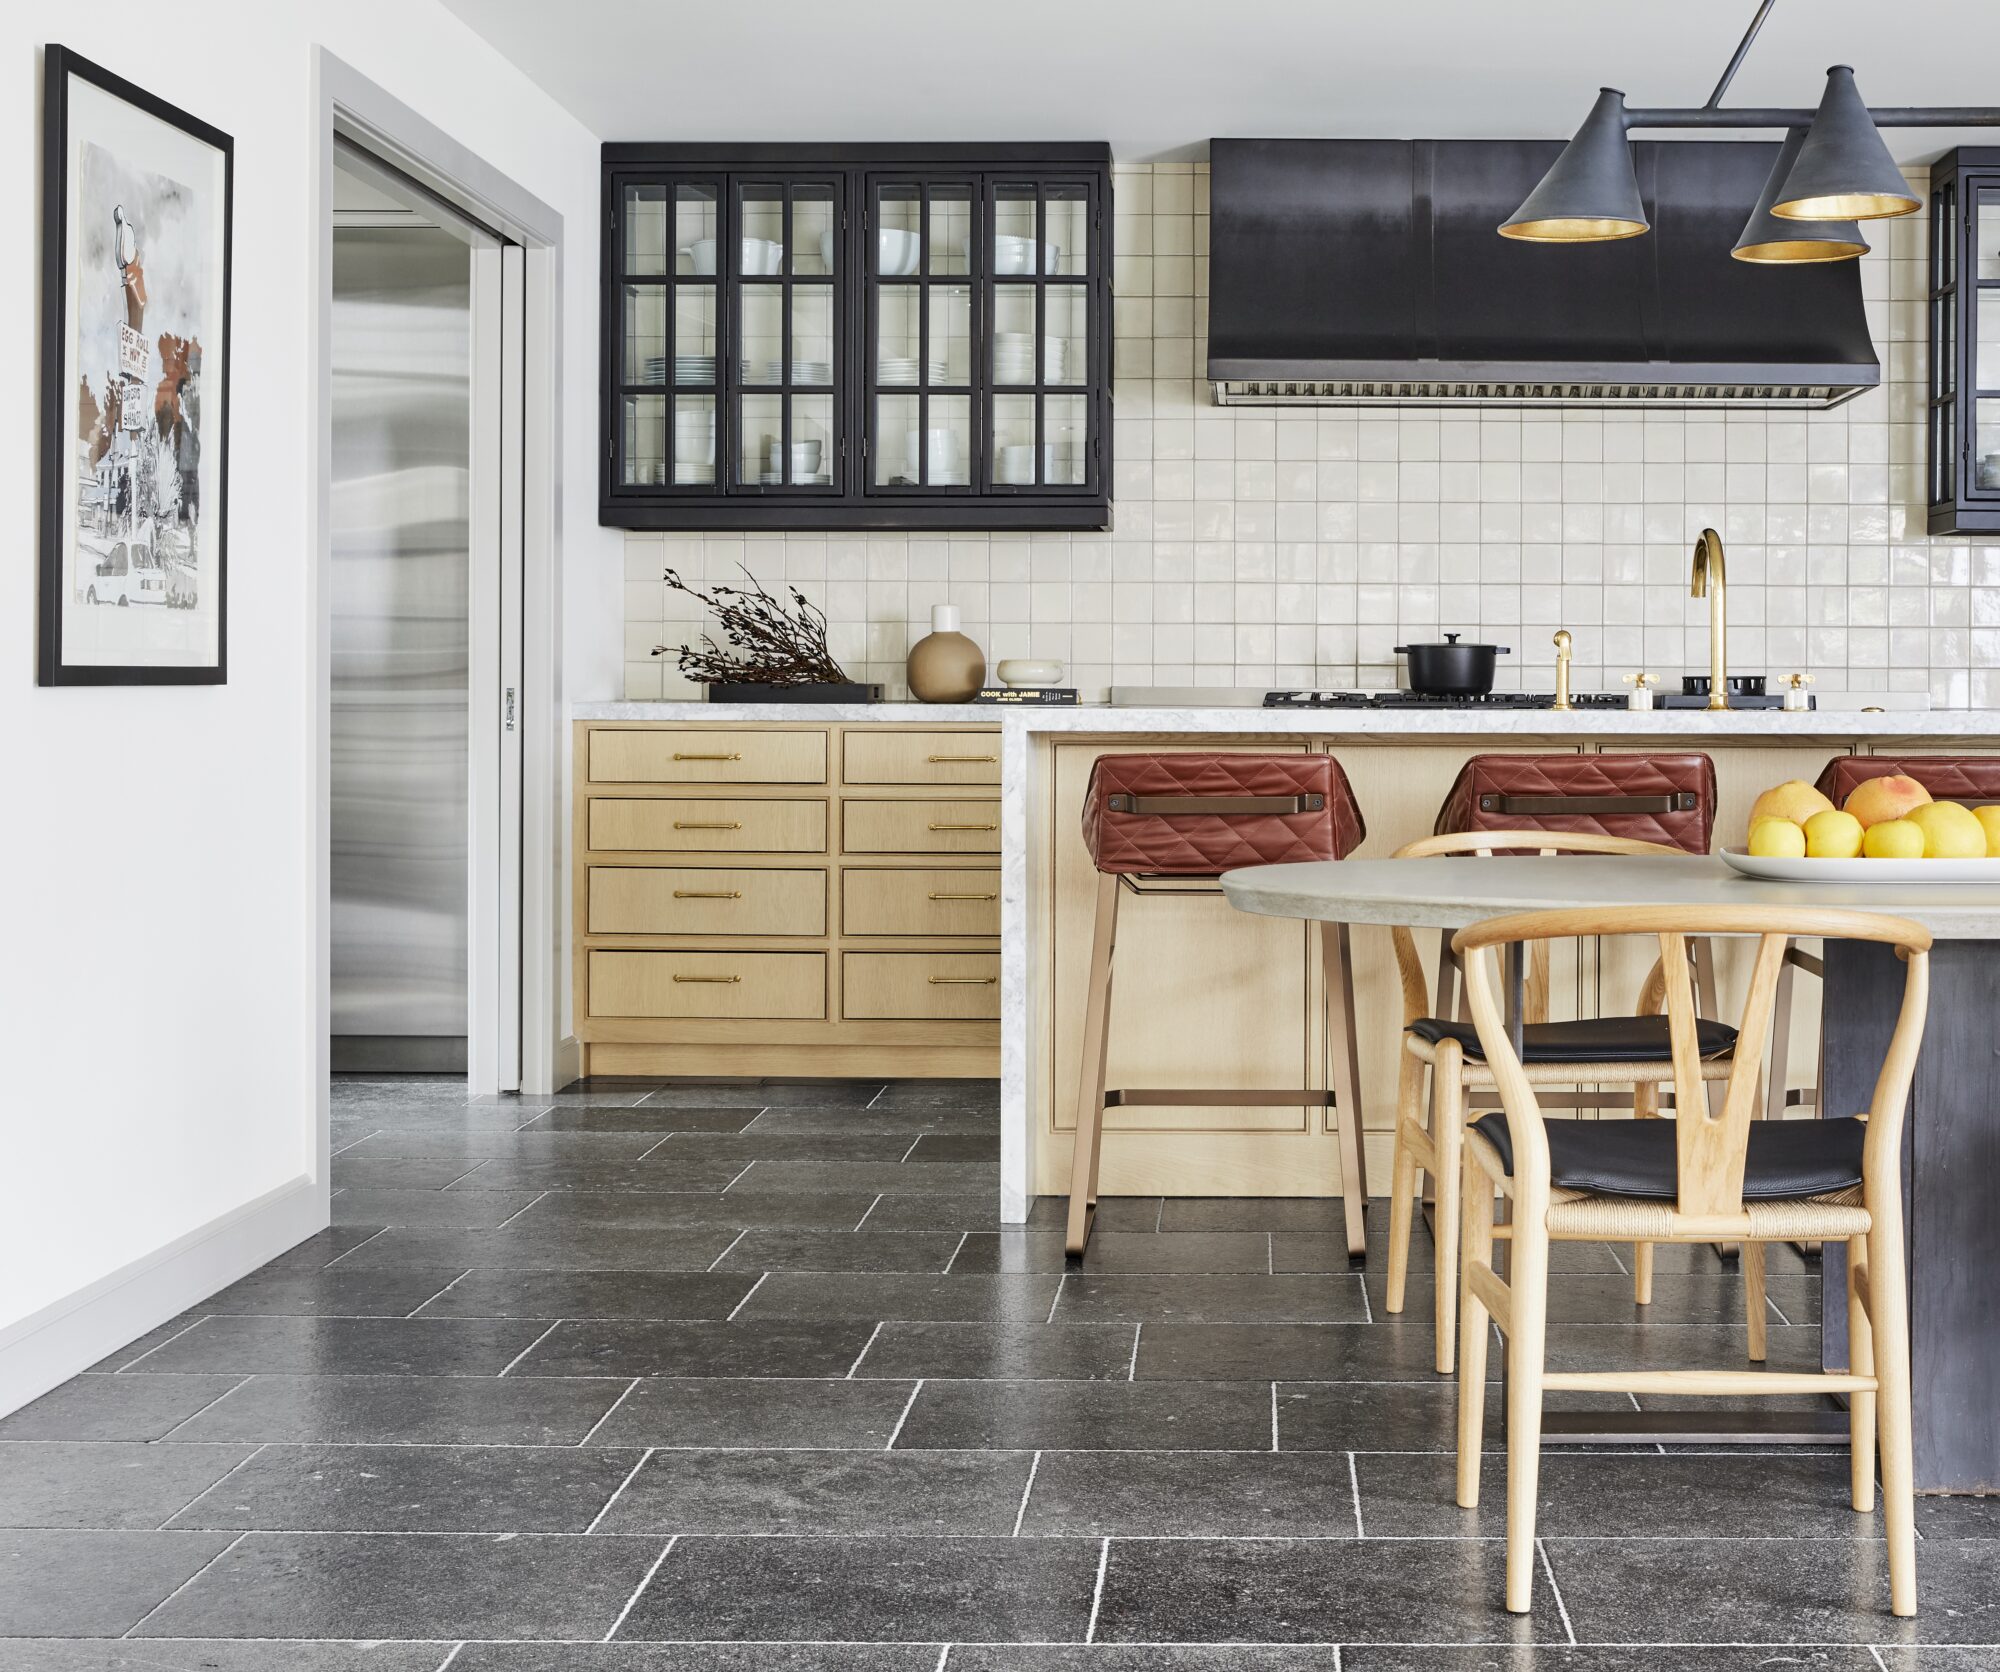 kitchen design with wooden furnishings and white tile